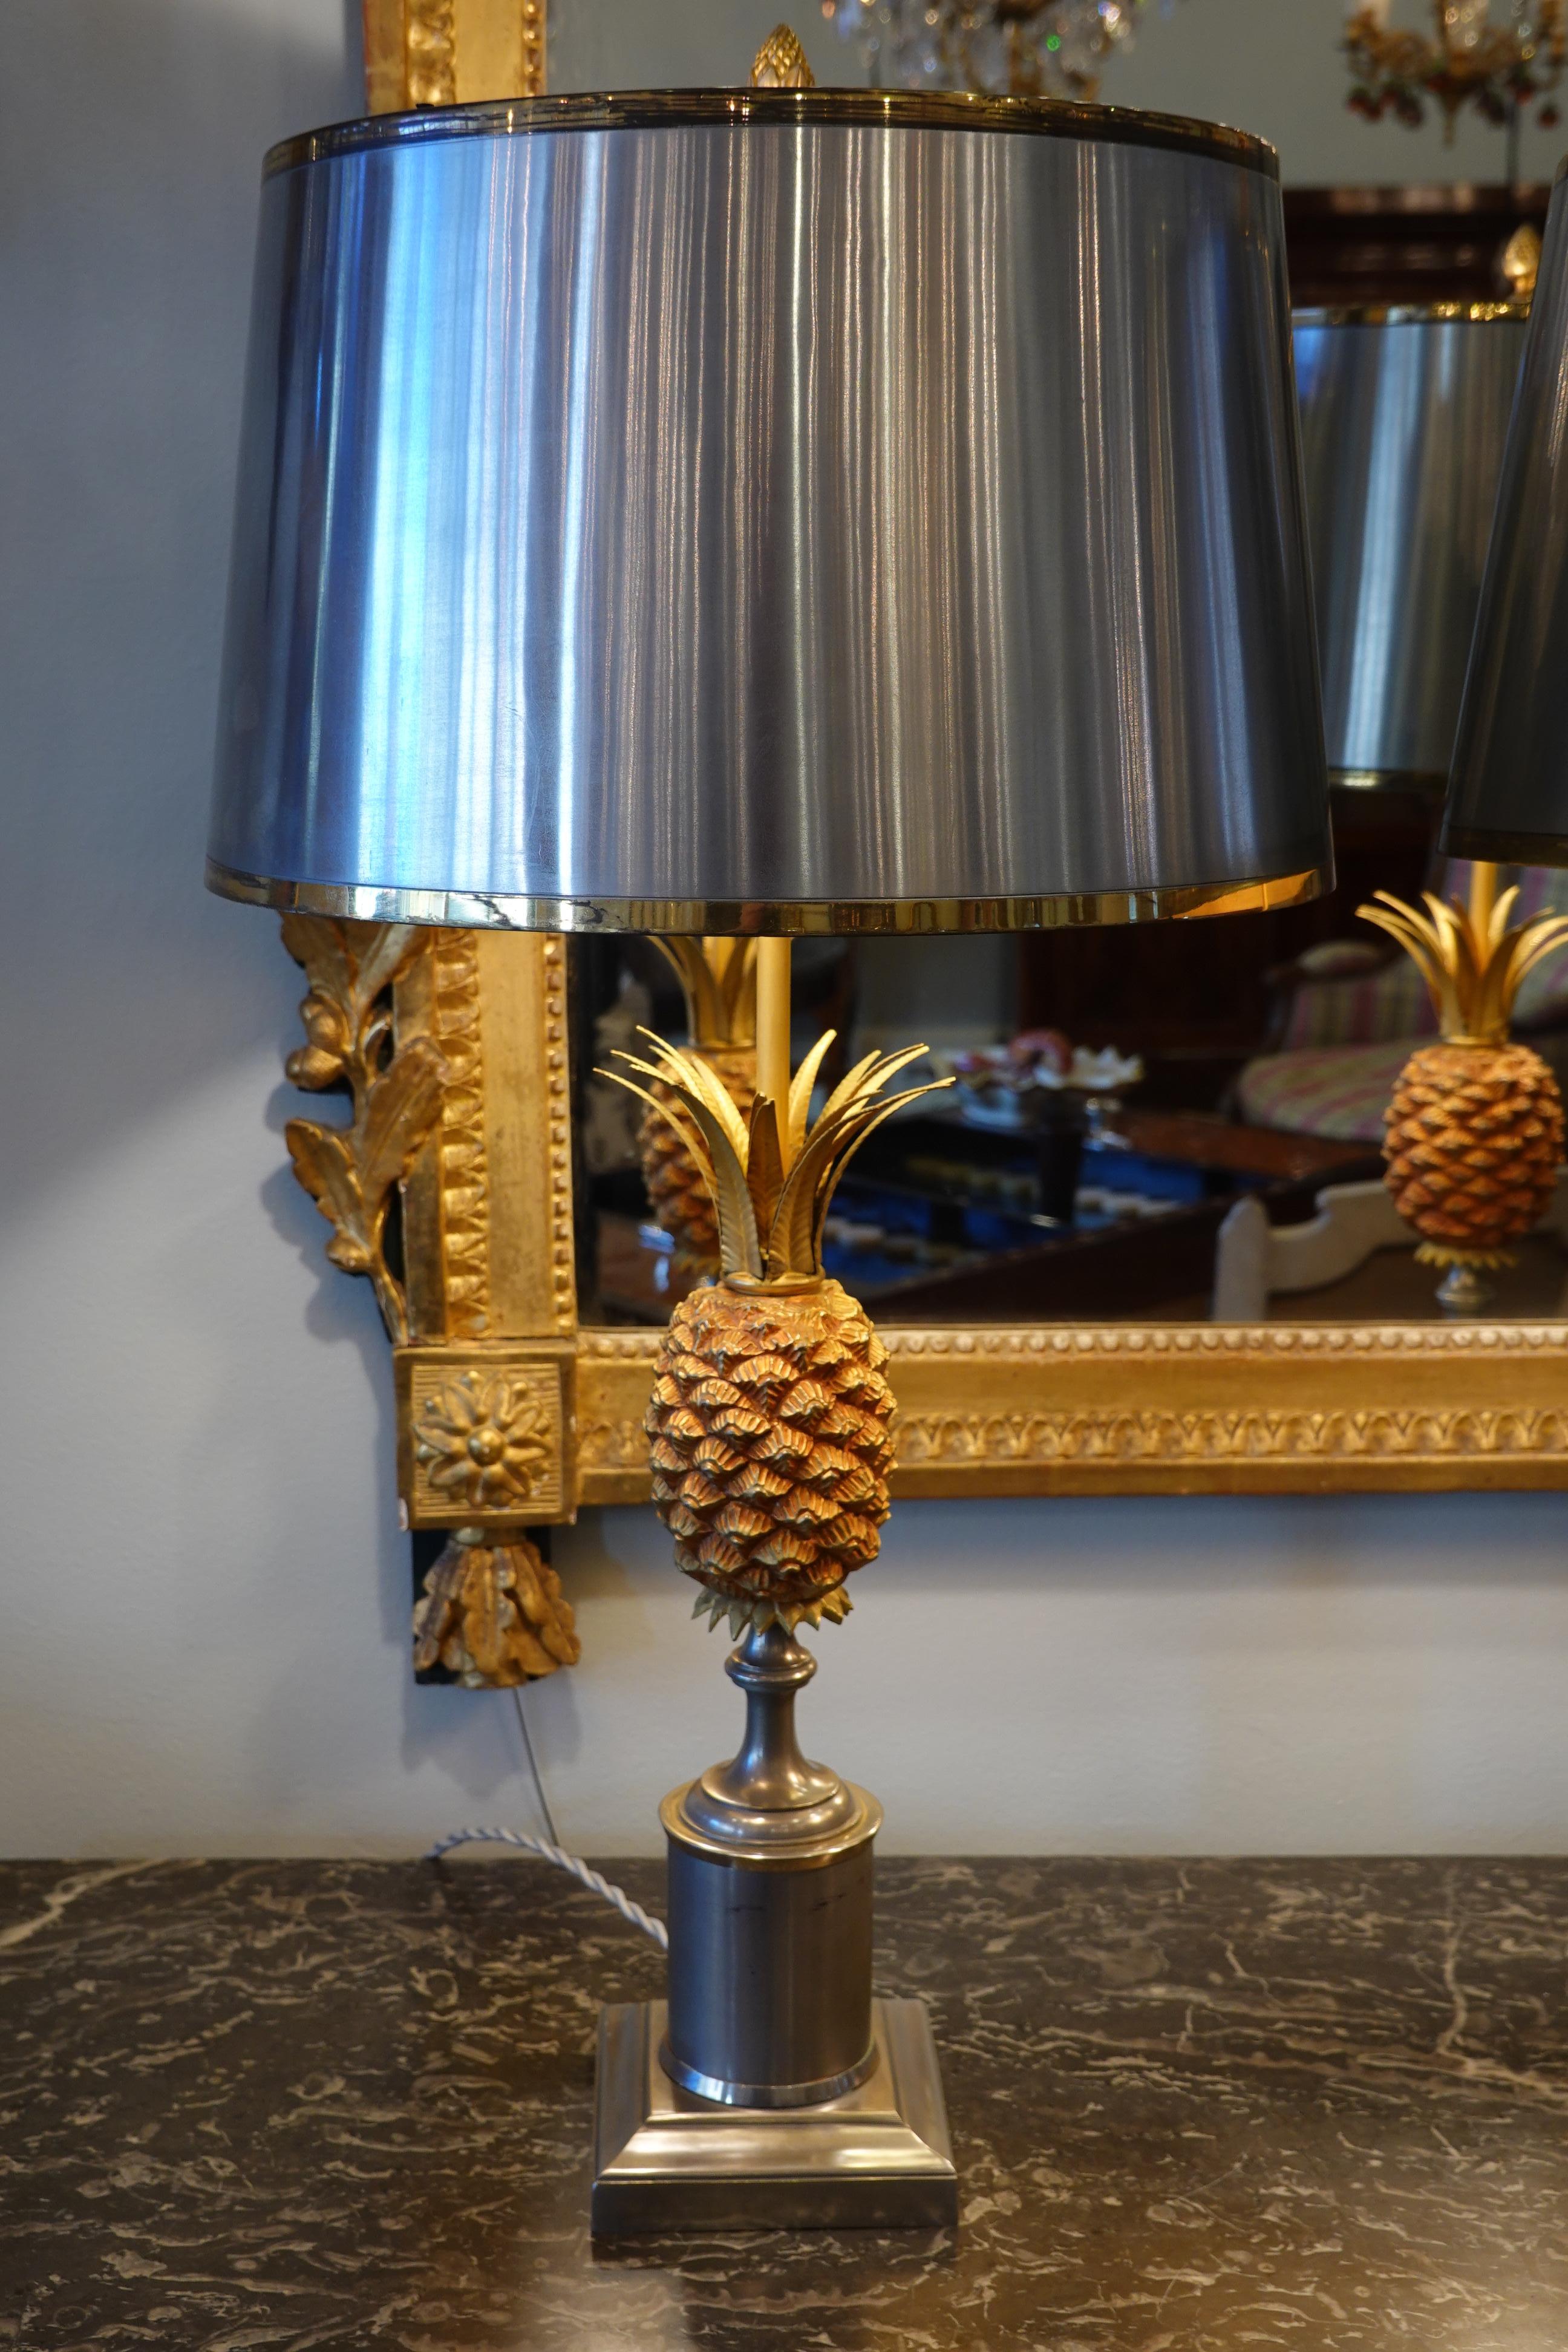 Brushed Pair of Pineapple Lamps with Metal Shades in the Style of Jansen or Charles